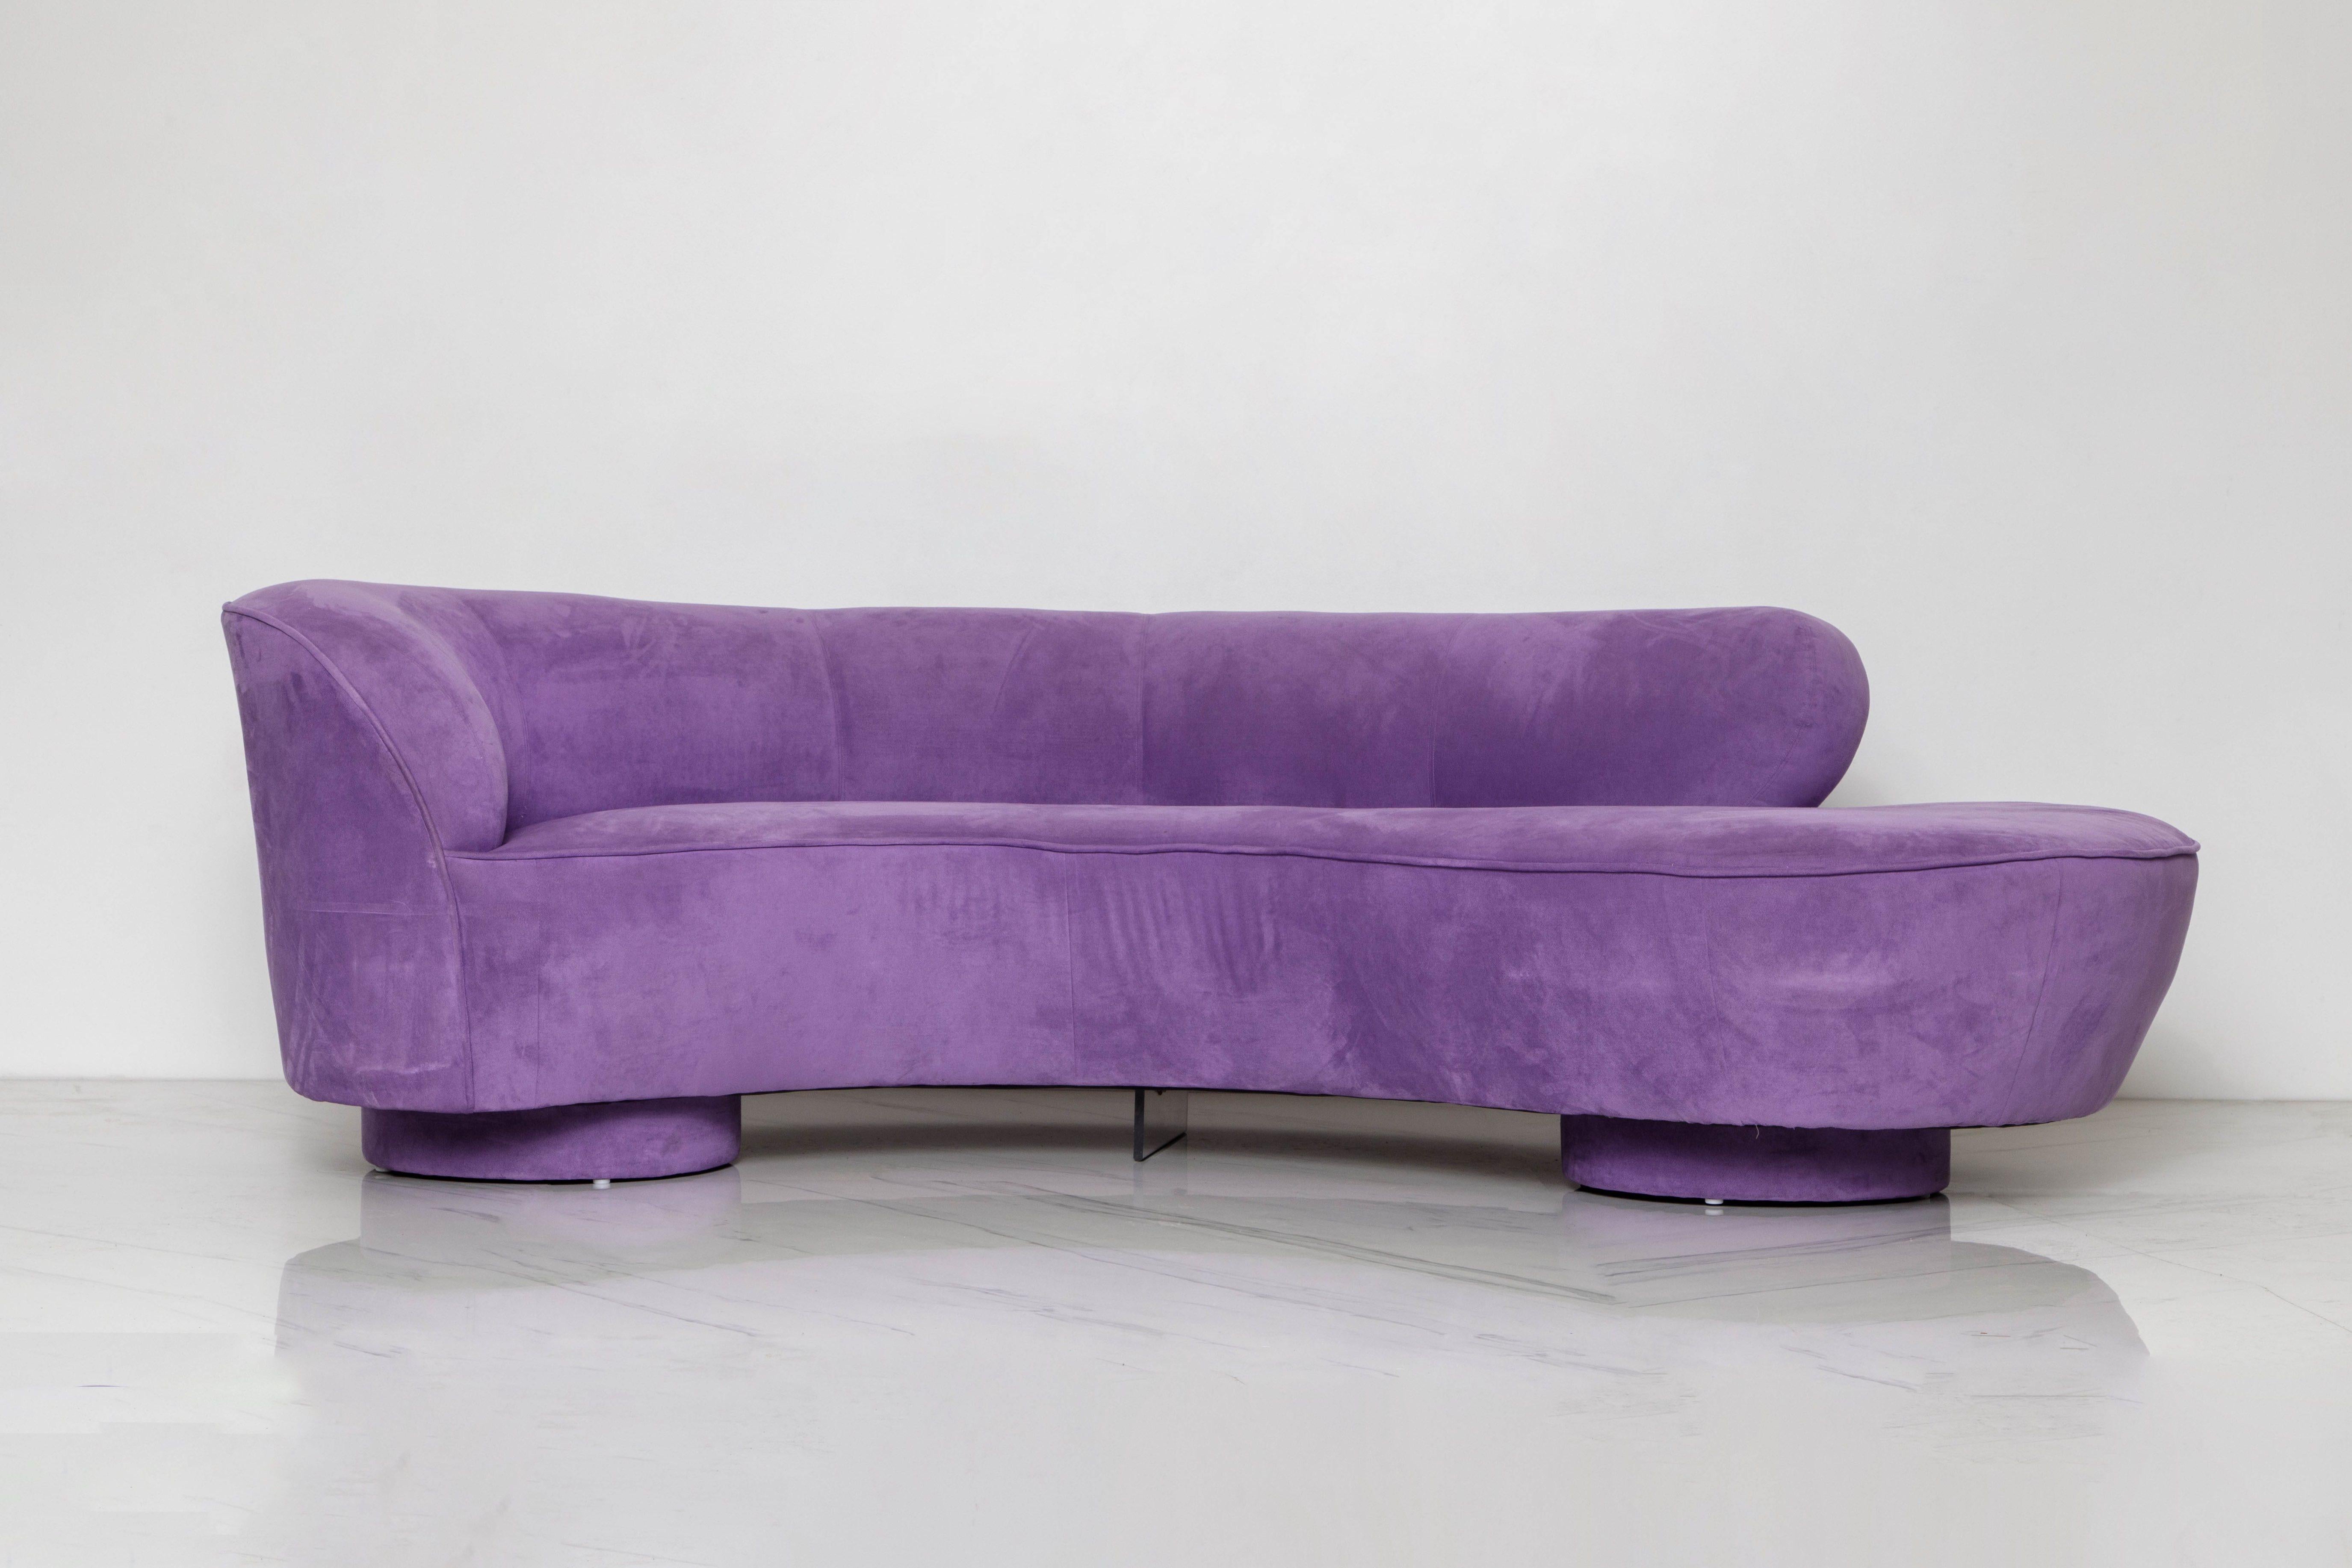 This mesmerizing Vladimir Kagan 'Cloud' sofa was produced by Directional in circa 1980 and is in its original soft lavender colored Alcantara fabric with lucite center leg, signed underneath with Directional label. Such on-trend color, just imagine